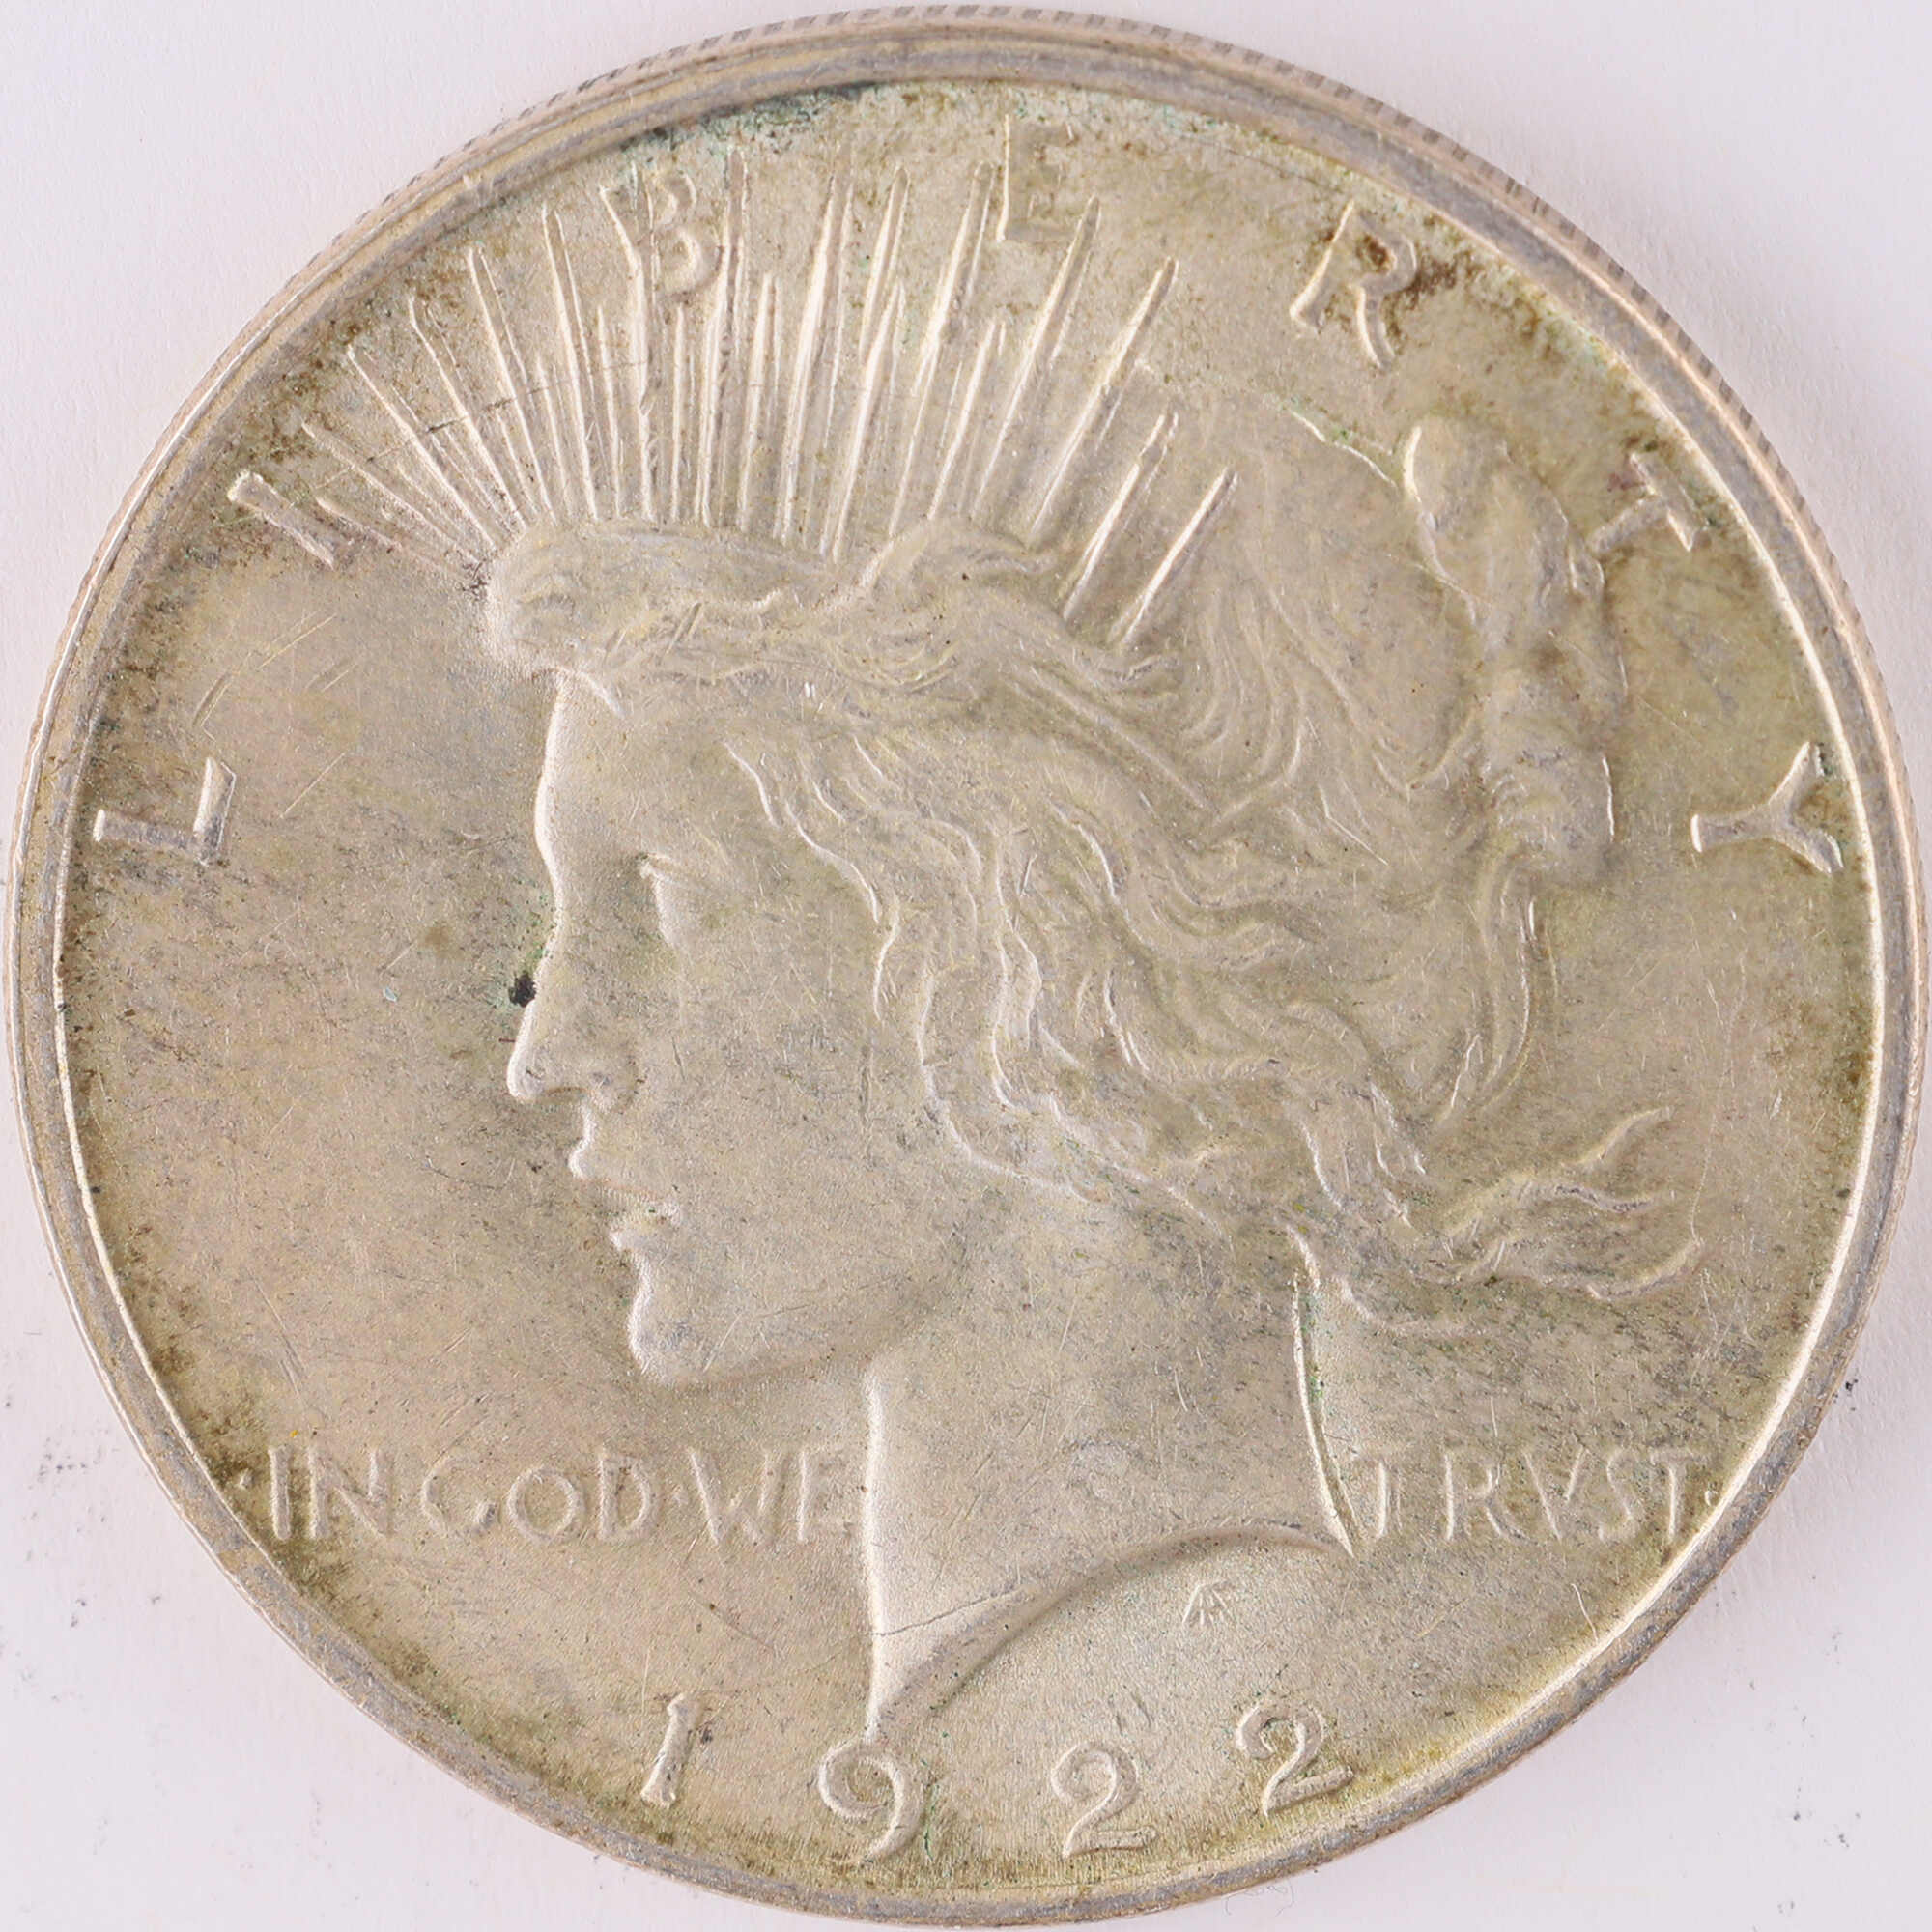 1922 D Peace Dollar AU About Uncirculated Silver $1 Coin SKU:I12076